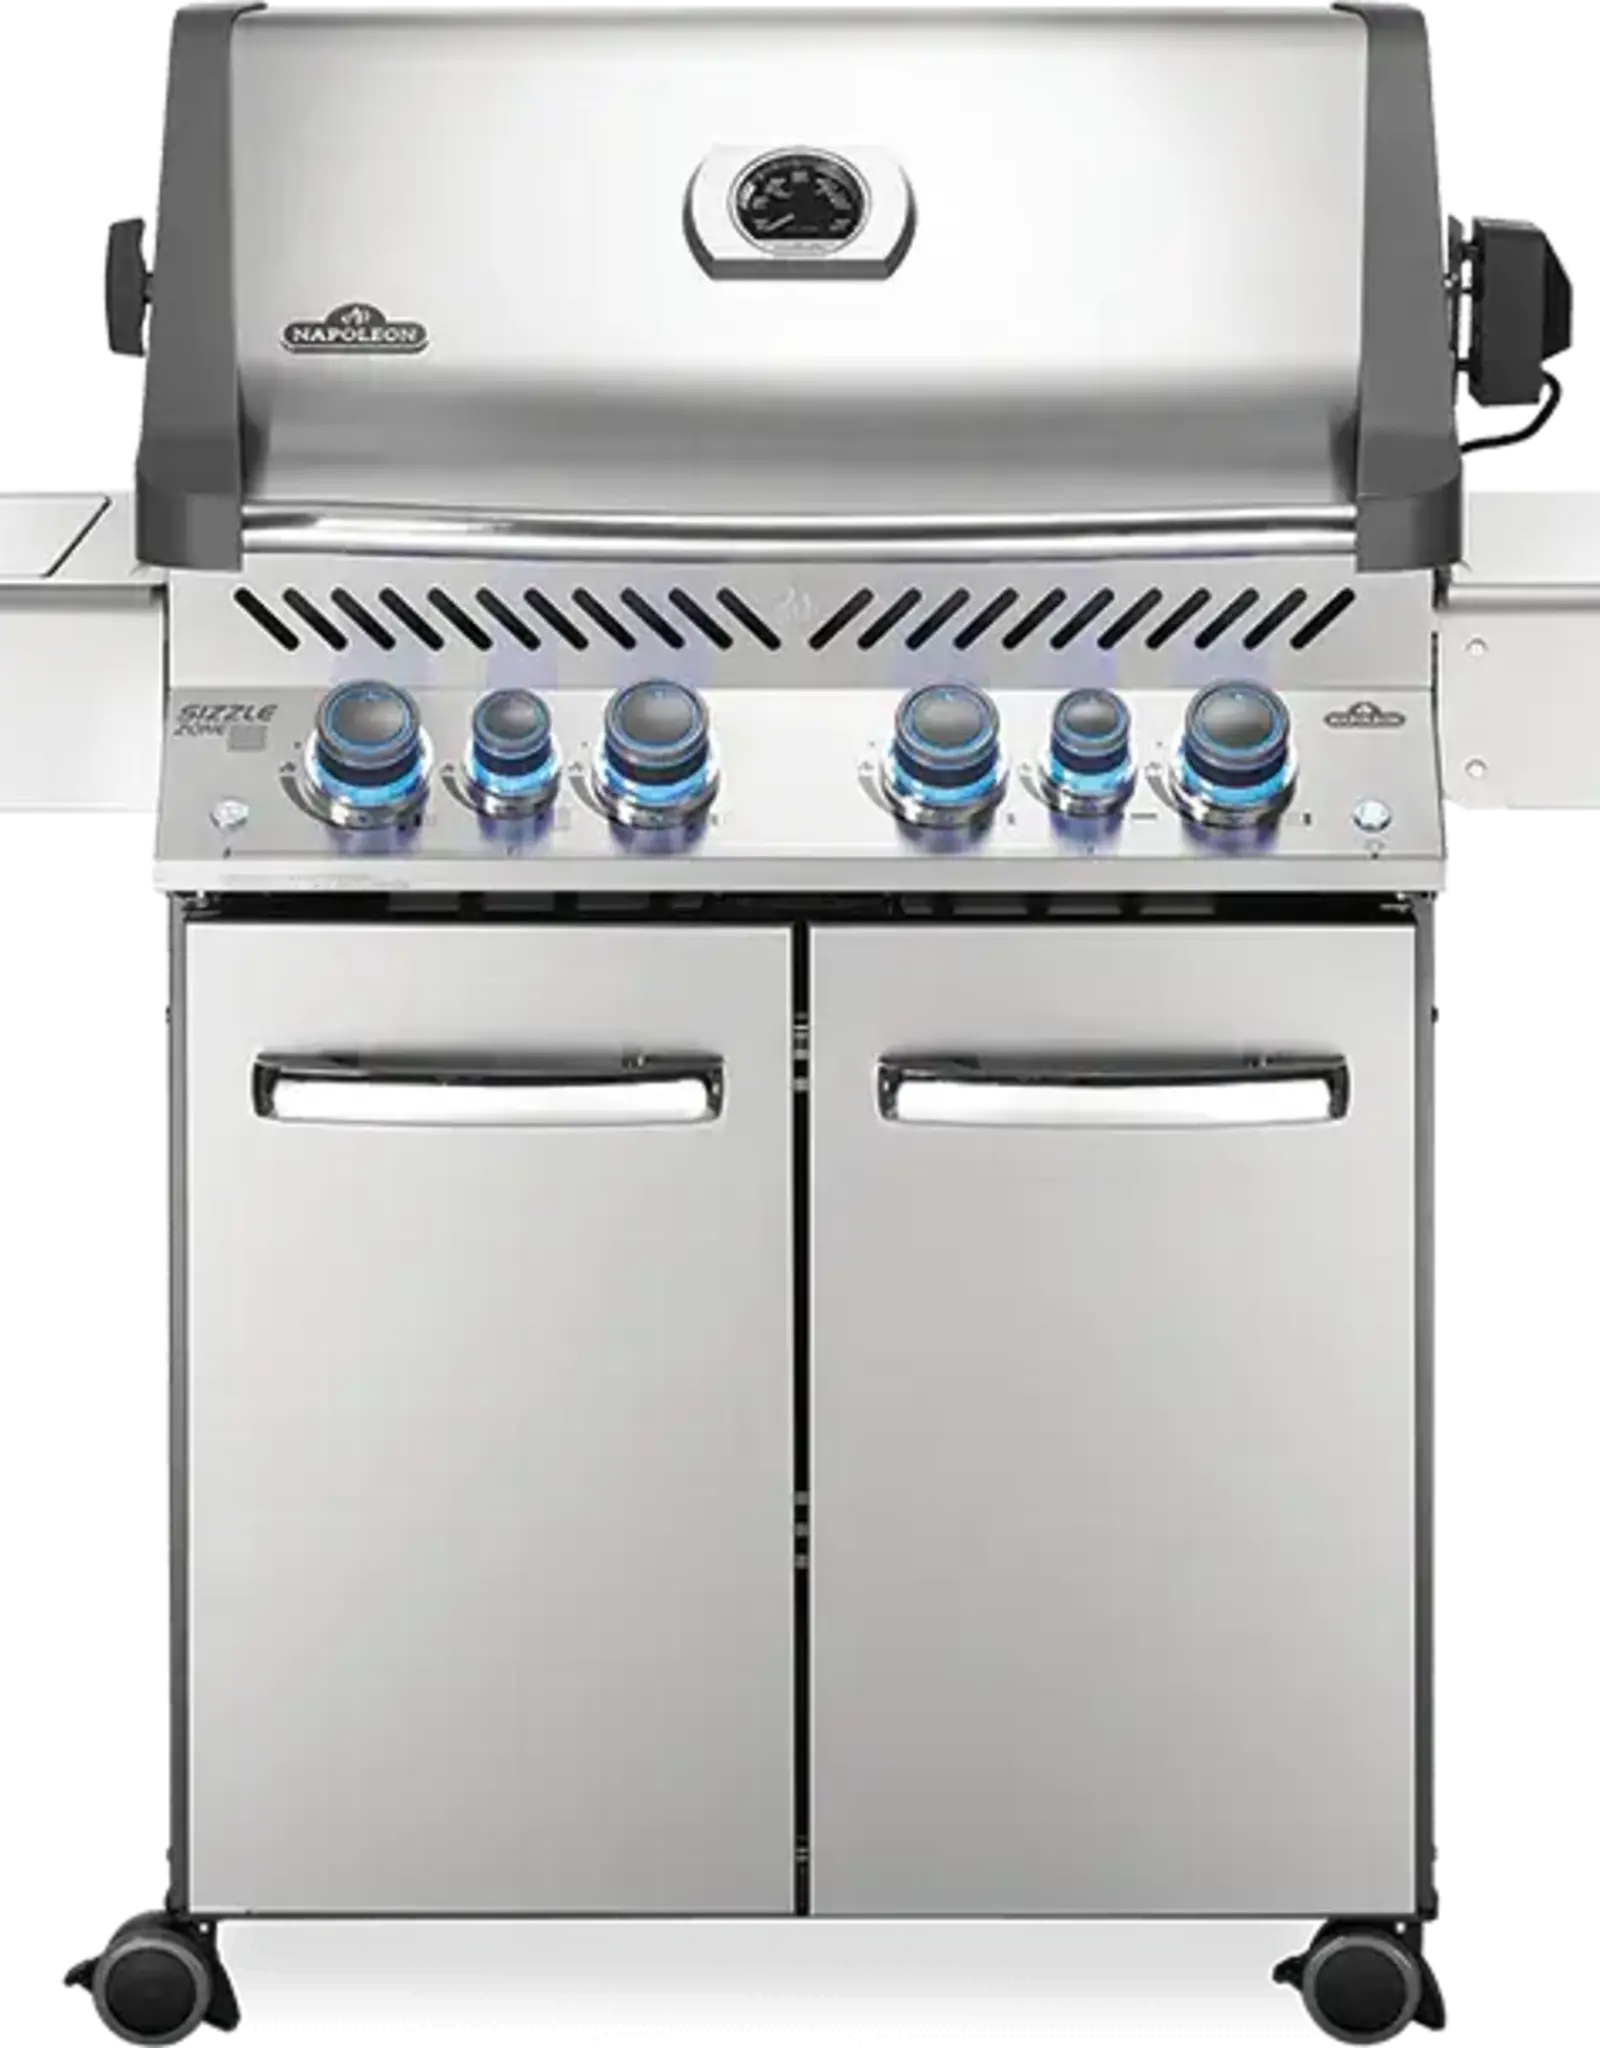 Napoleon Napoleon Prestige 500 Natural Gas Grill with Infrared Rear Burner and Infrared Side Burner and Rotisserie Kit - P500RSIBNSS-3